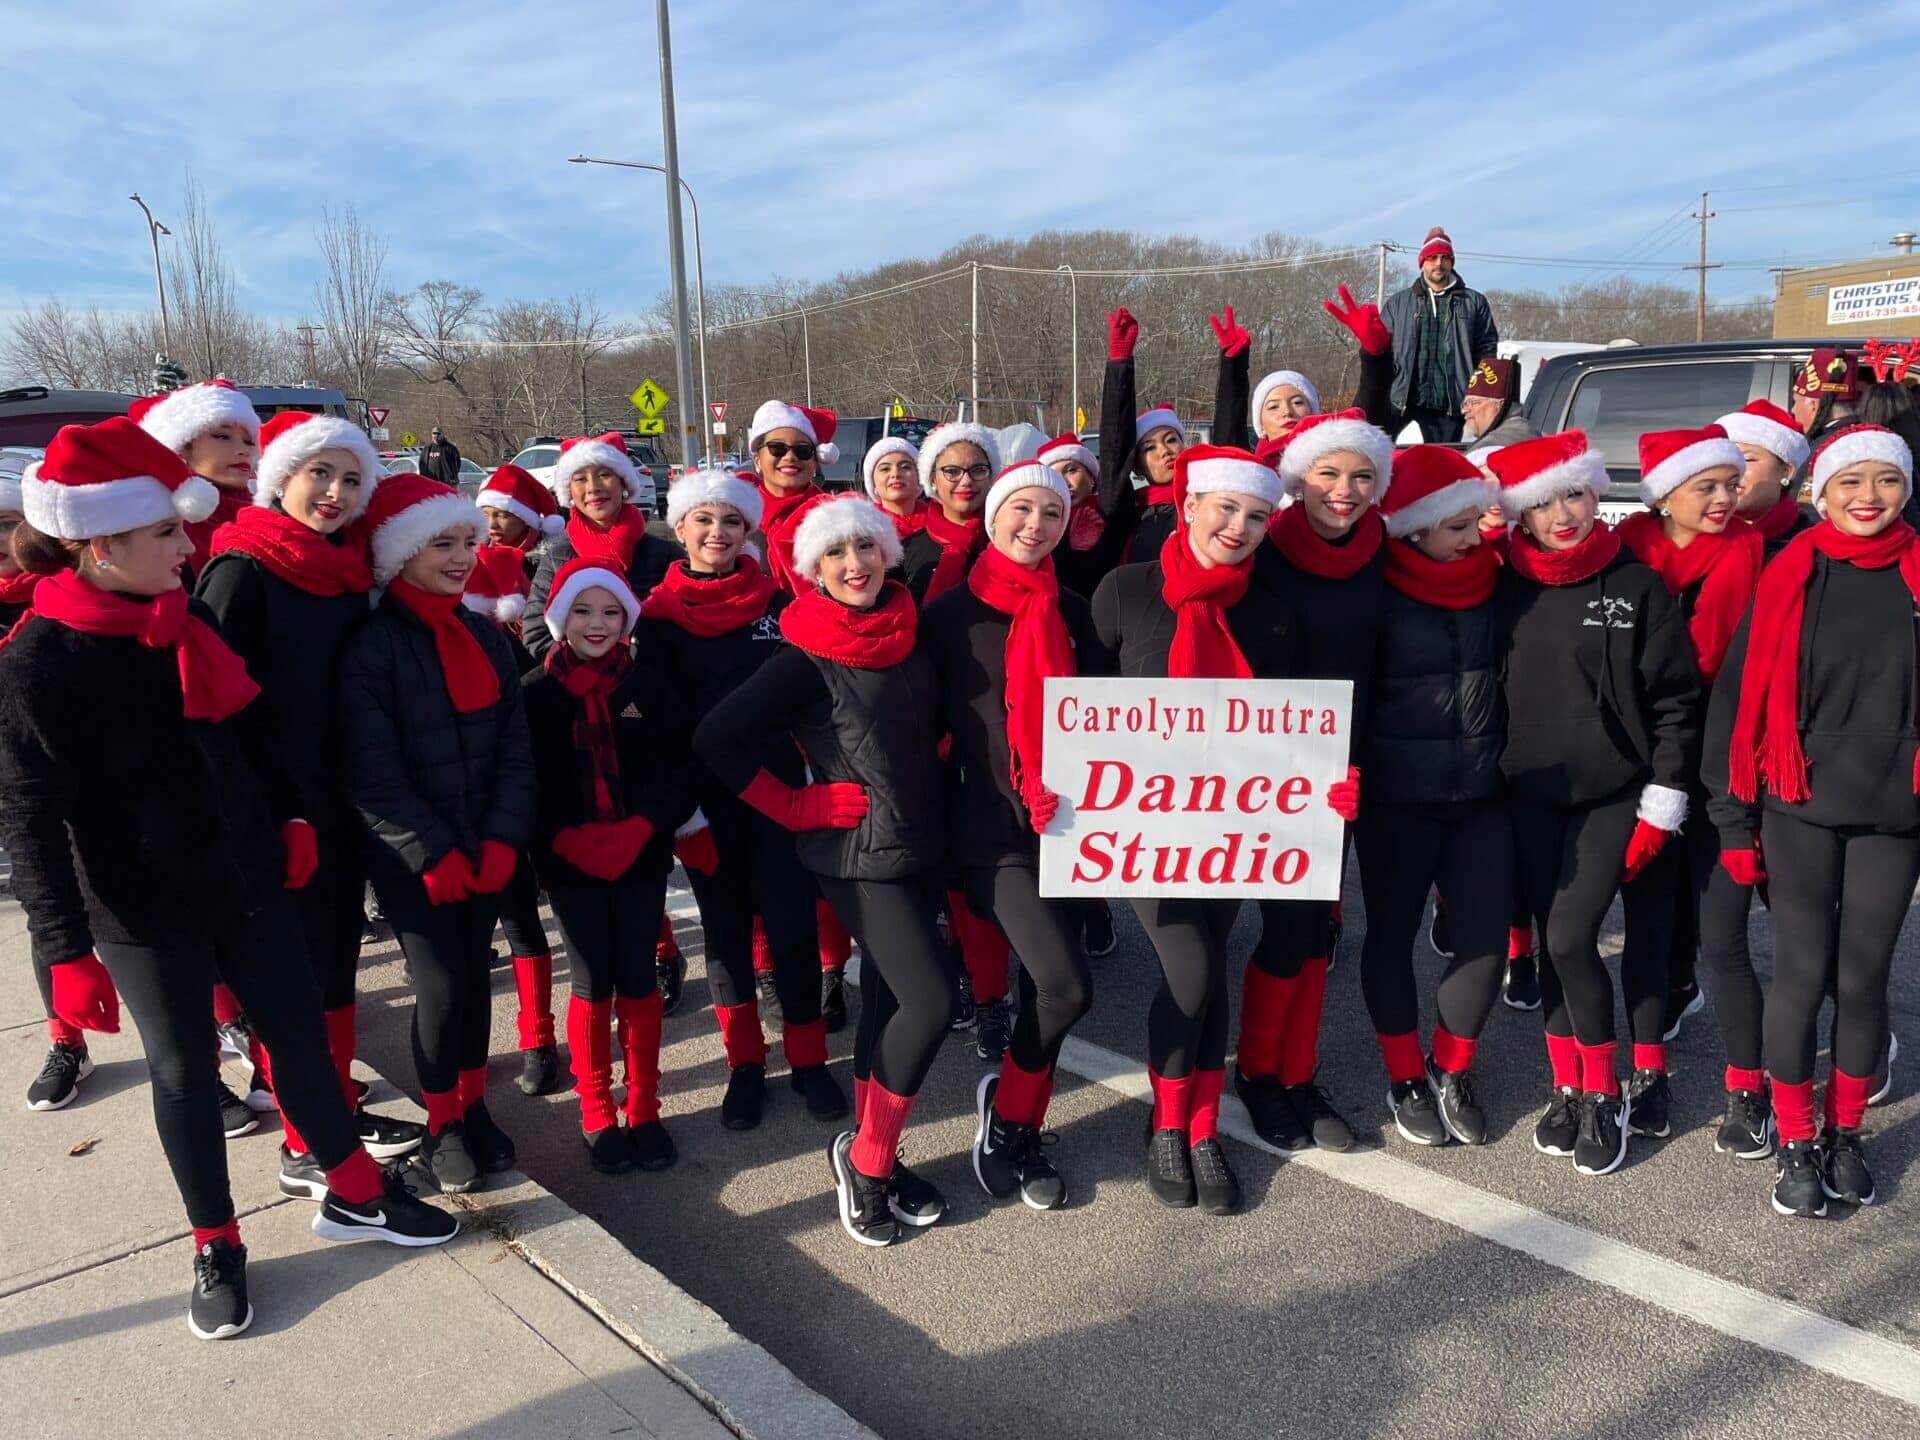 [CREDIT: Rob Borkowski] The Carolyn Sutra Dancers prepare for The Rolling, Strolling Apponaug Winter Festival parade behind City Hall. Sophia Ferraro with the team hold their sign.